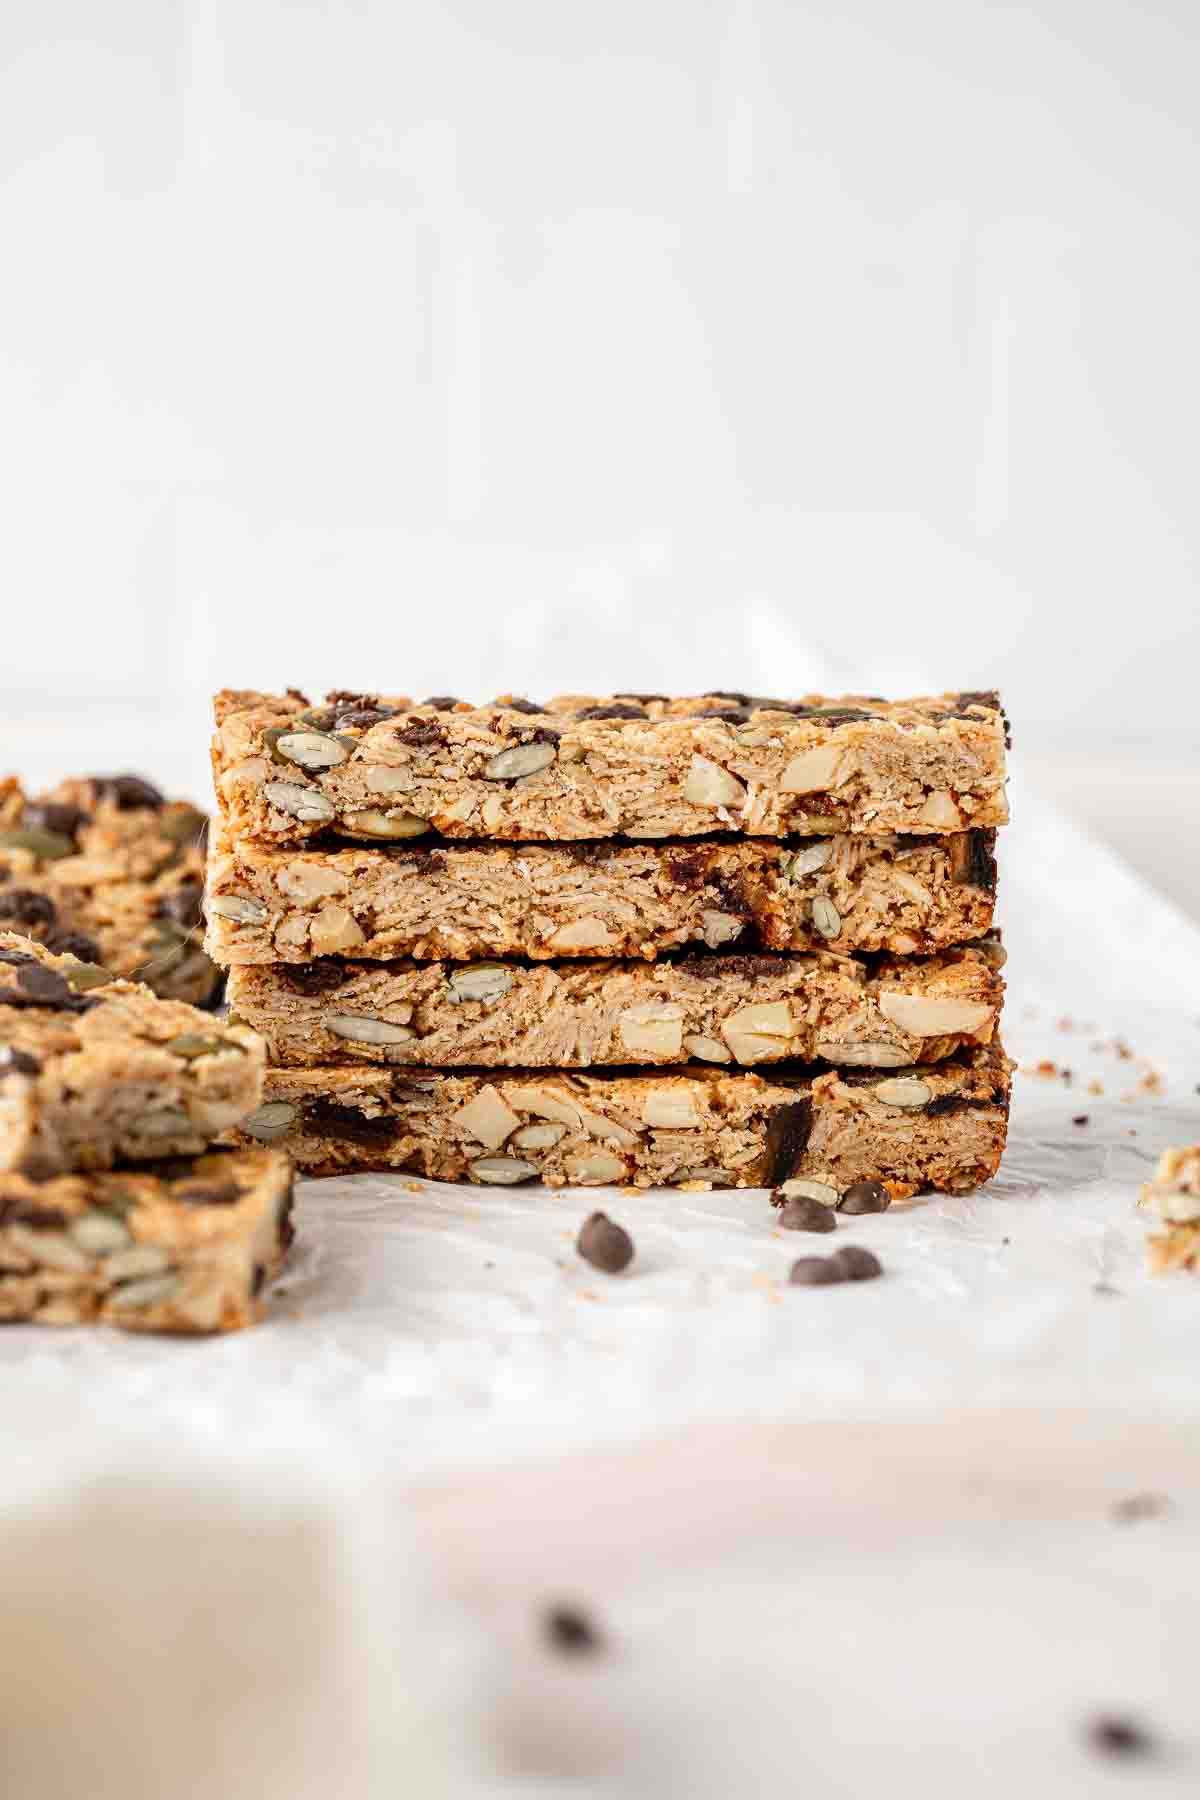 A stack of 4 granola bars with chocolate chips.